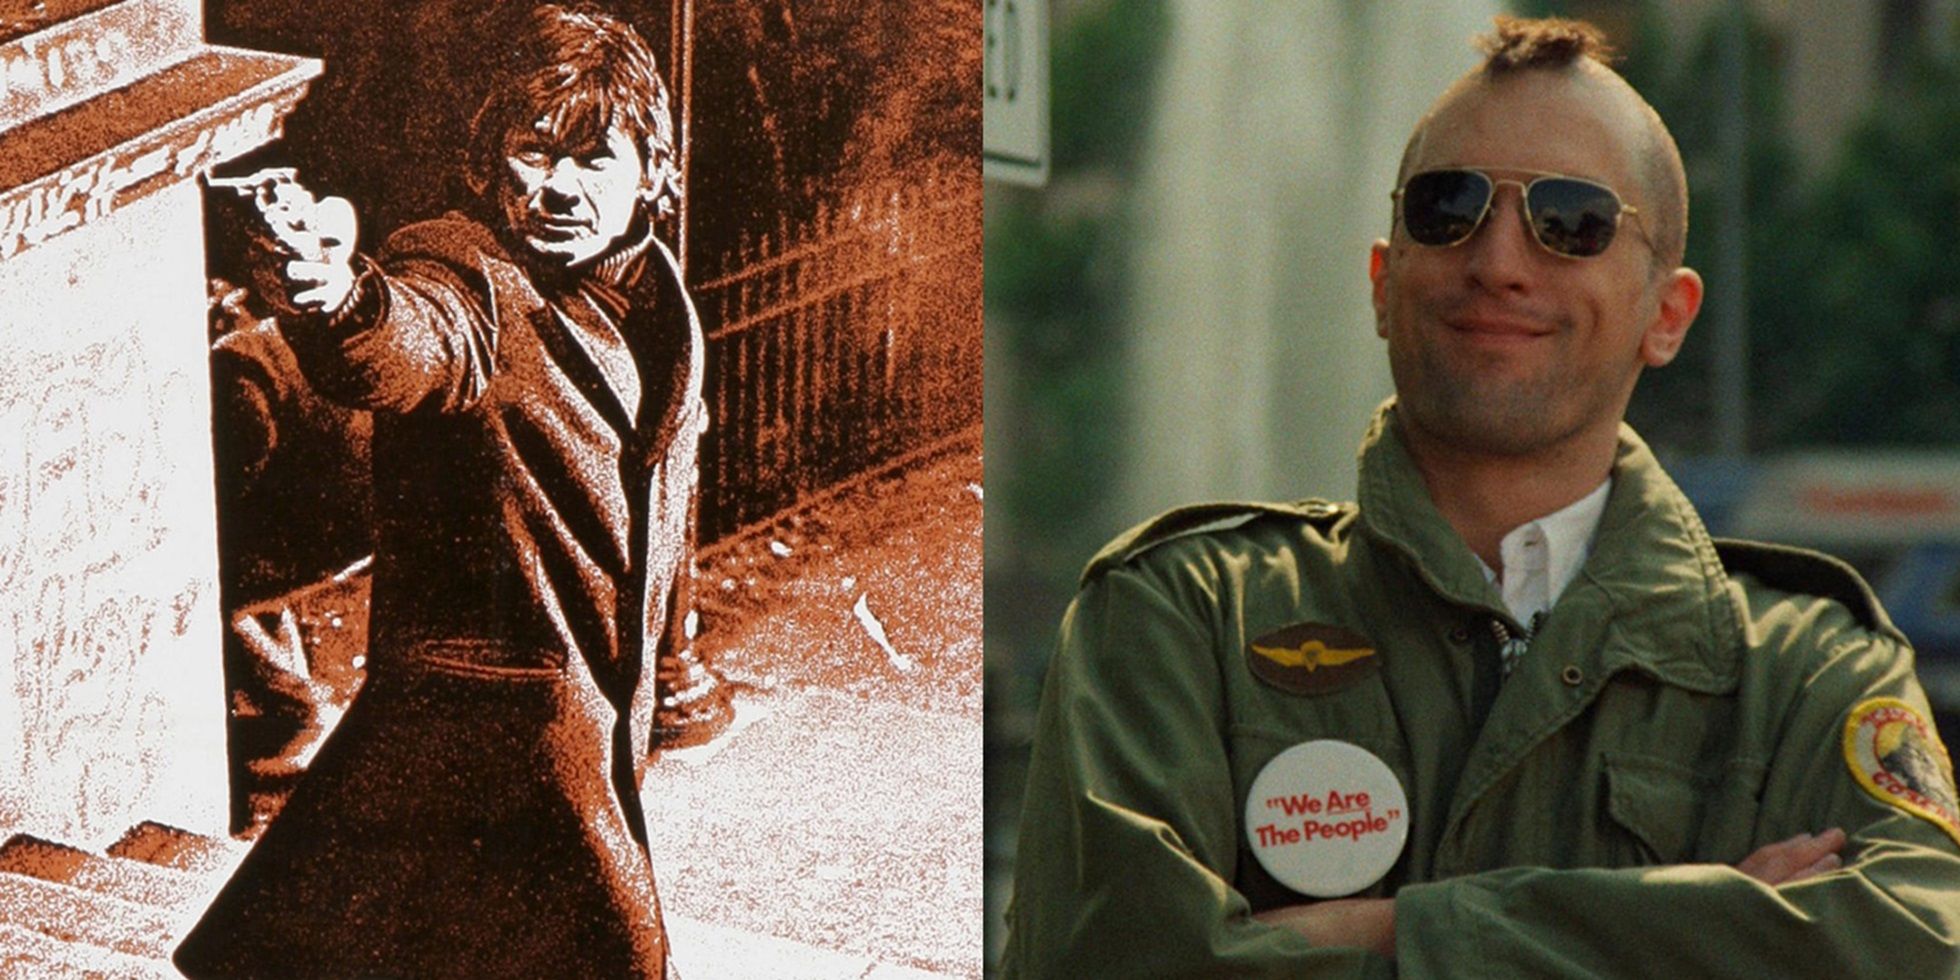 Gritty vigilante movies split image Death Wish and Taxi Driver